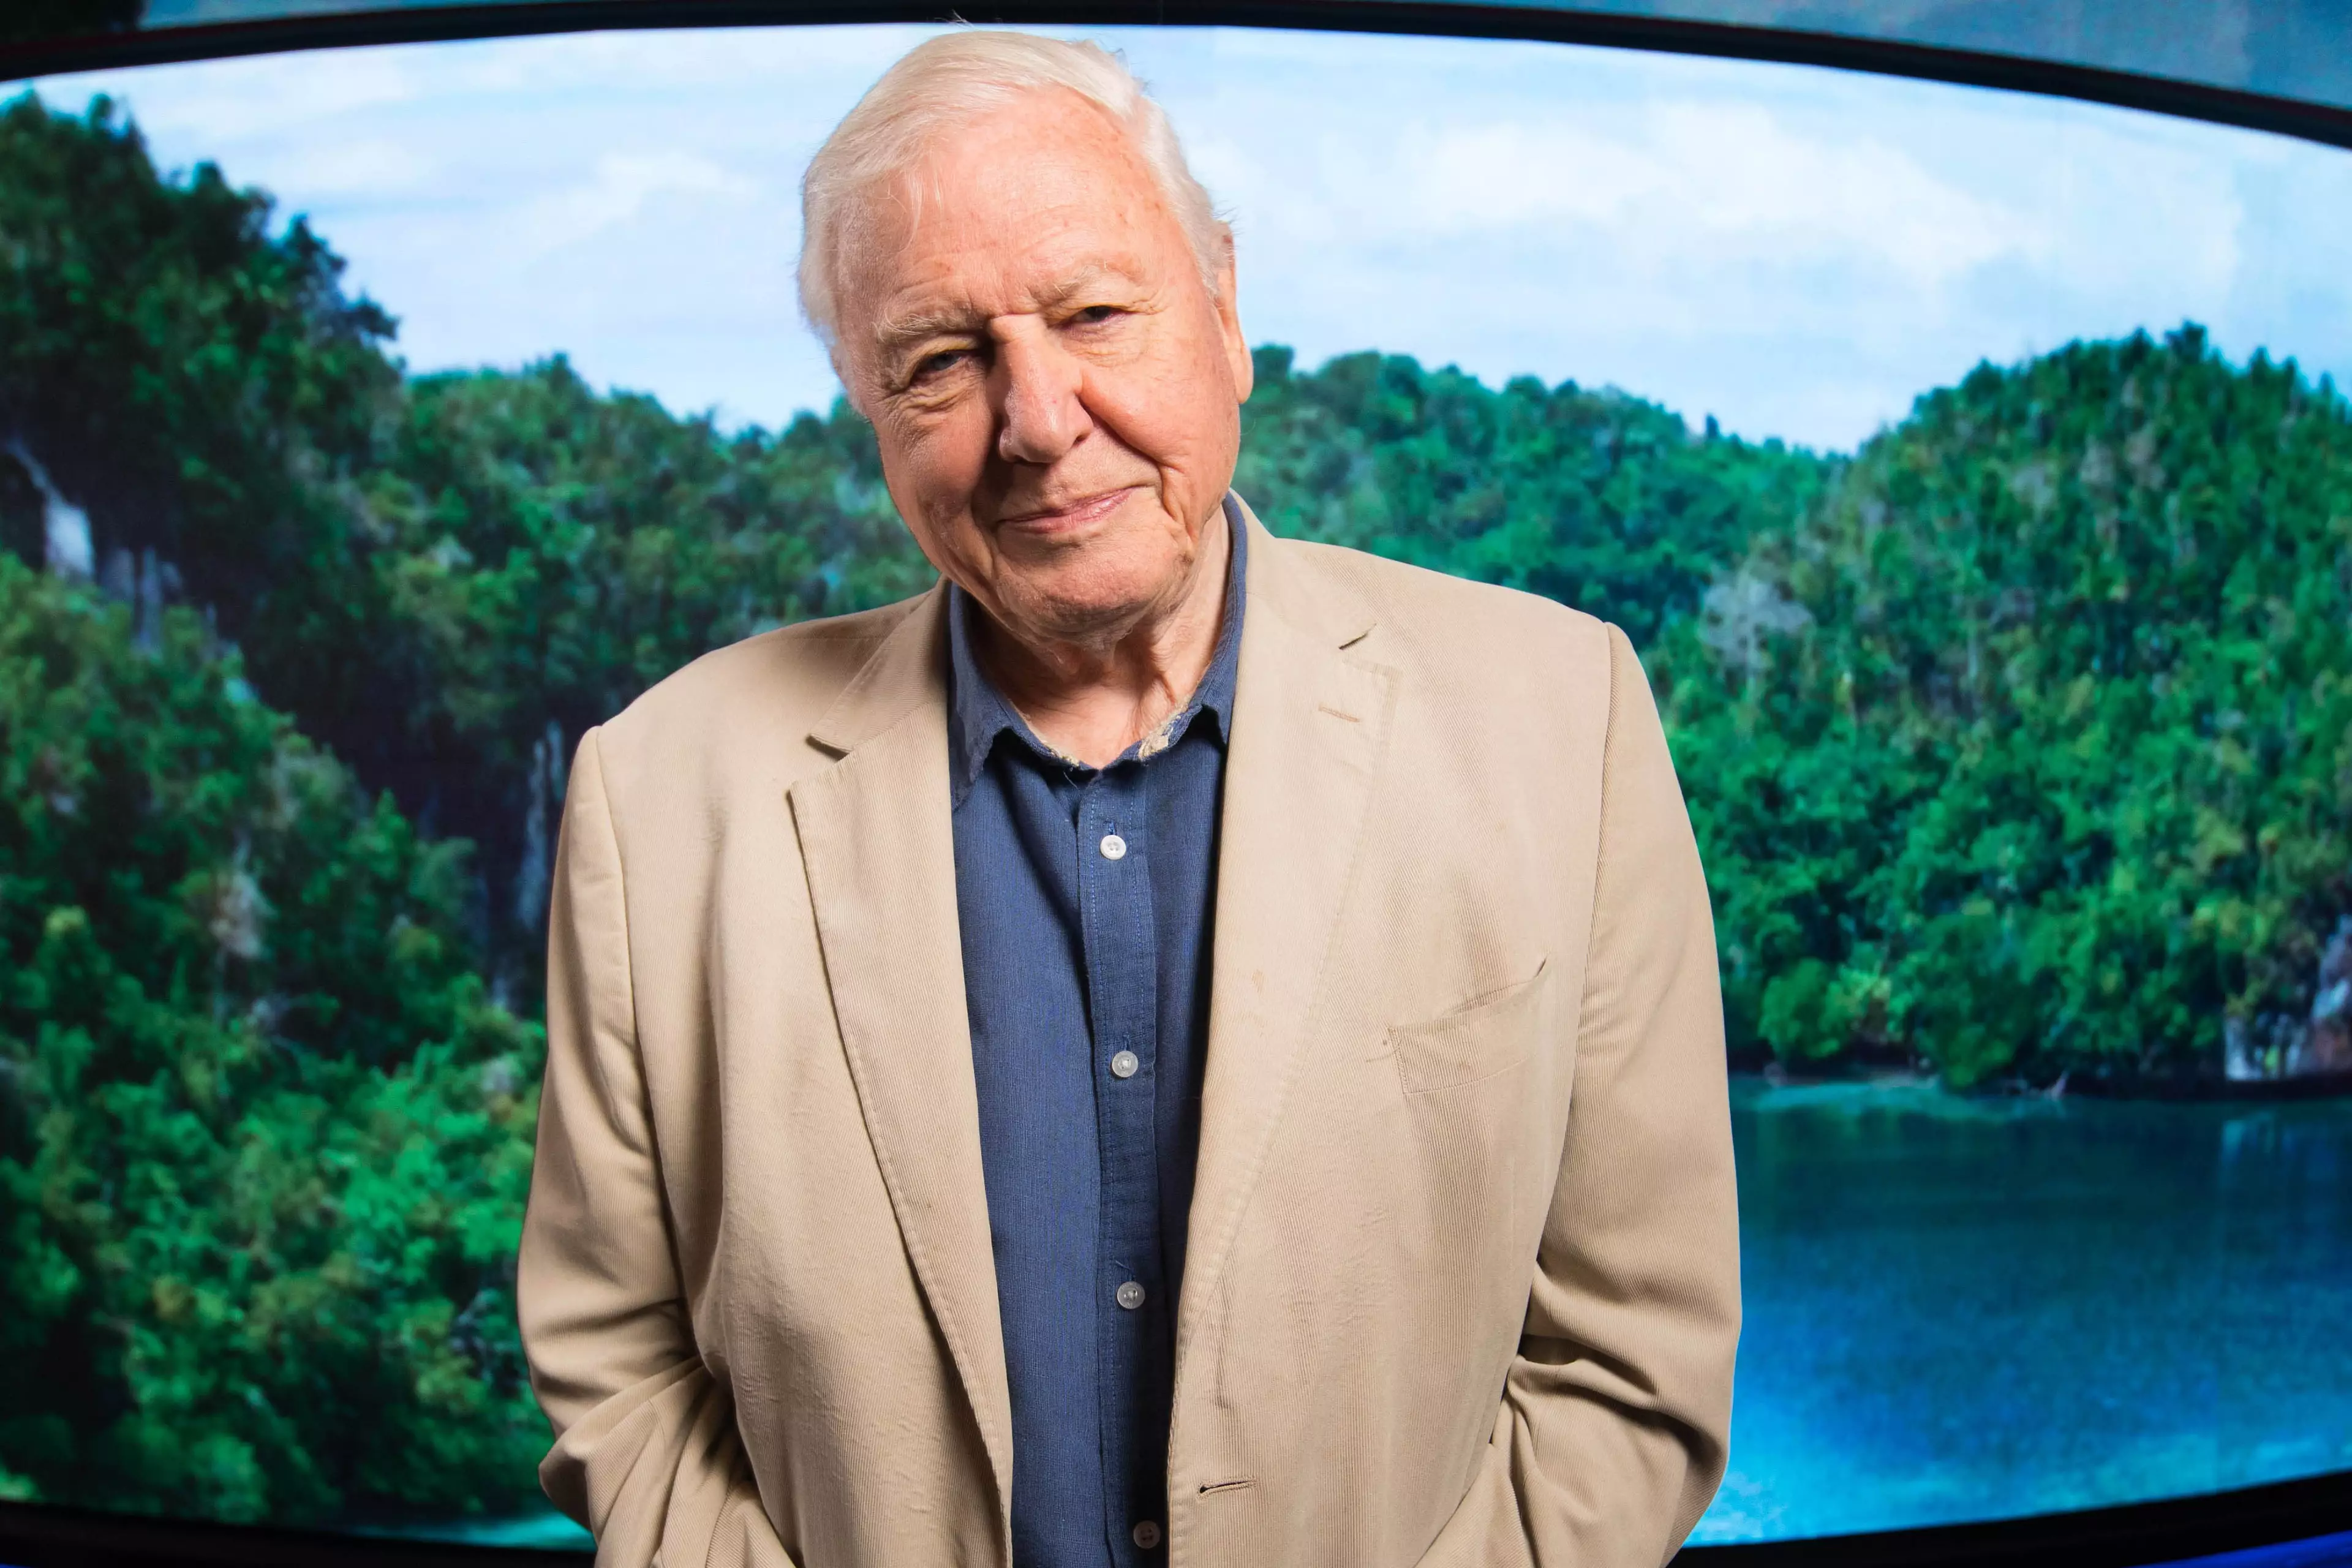 Sir David is heading a campaign to raise £12m to help save London Zoo.